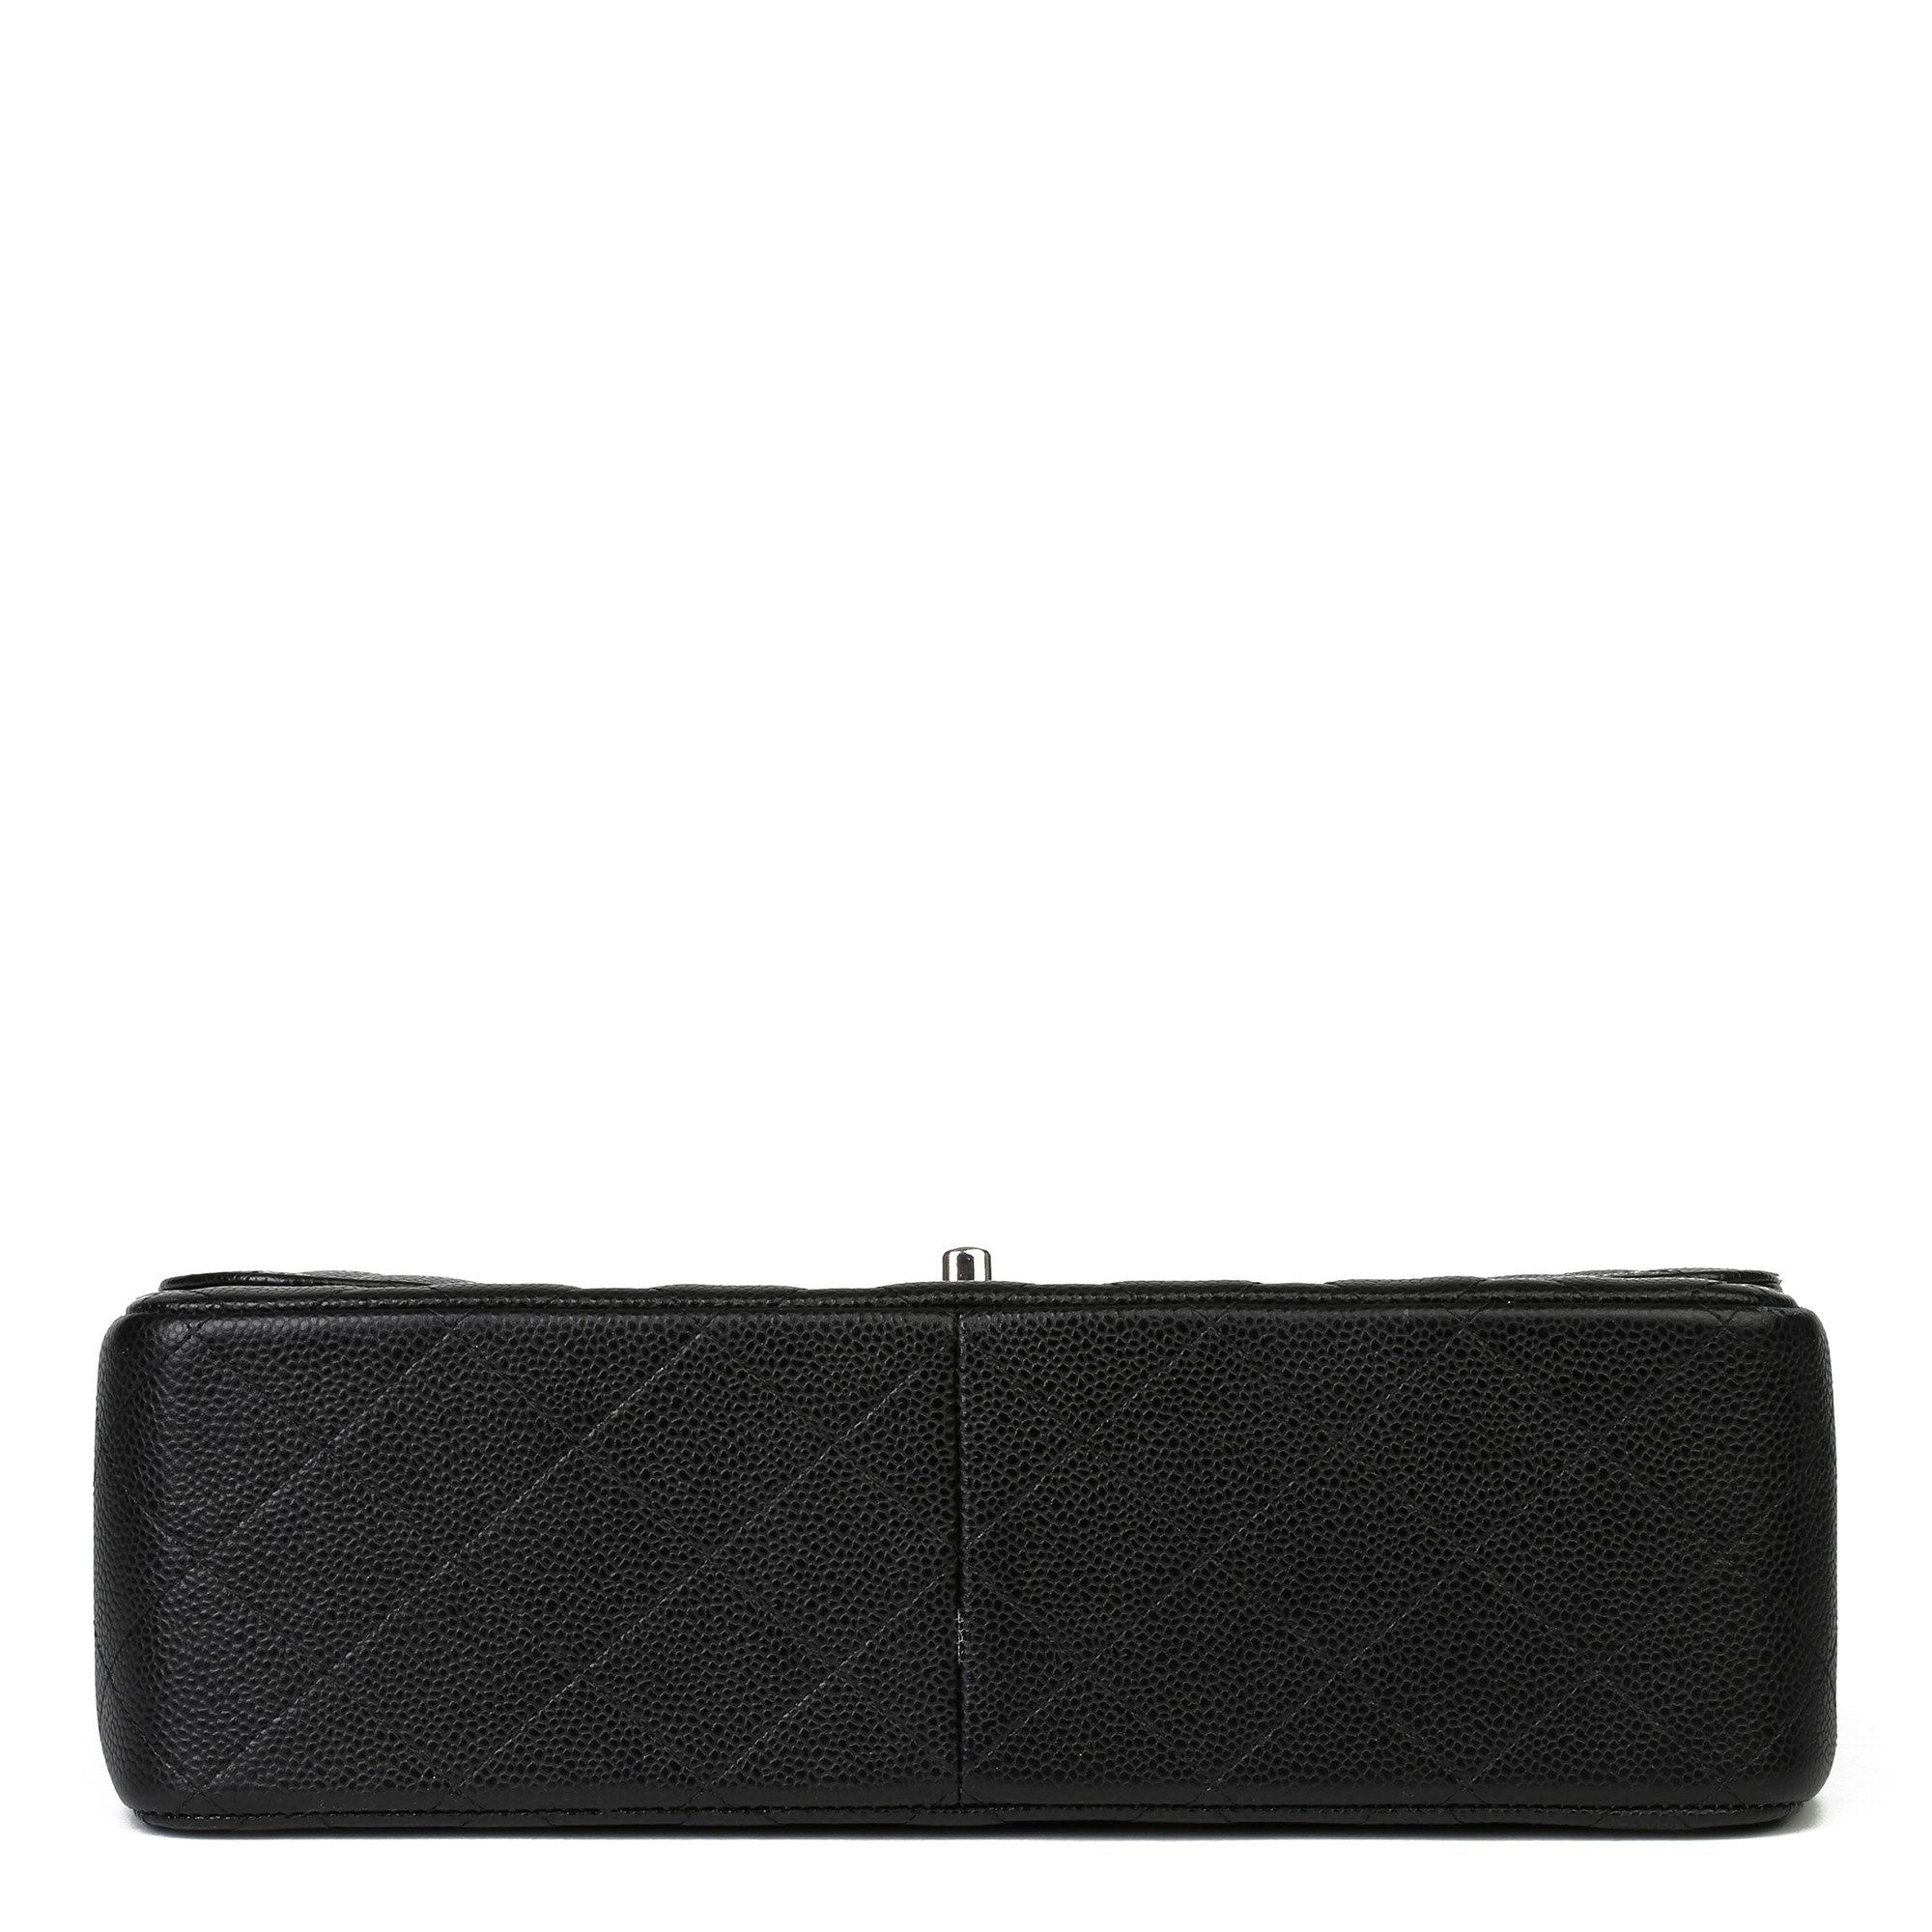 Chanel Black Quilted Caviar Leather Vintage Jumbo Classic Double Flap Bag